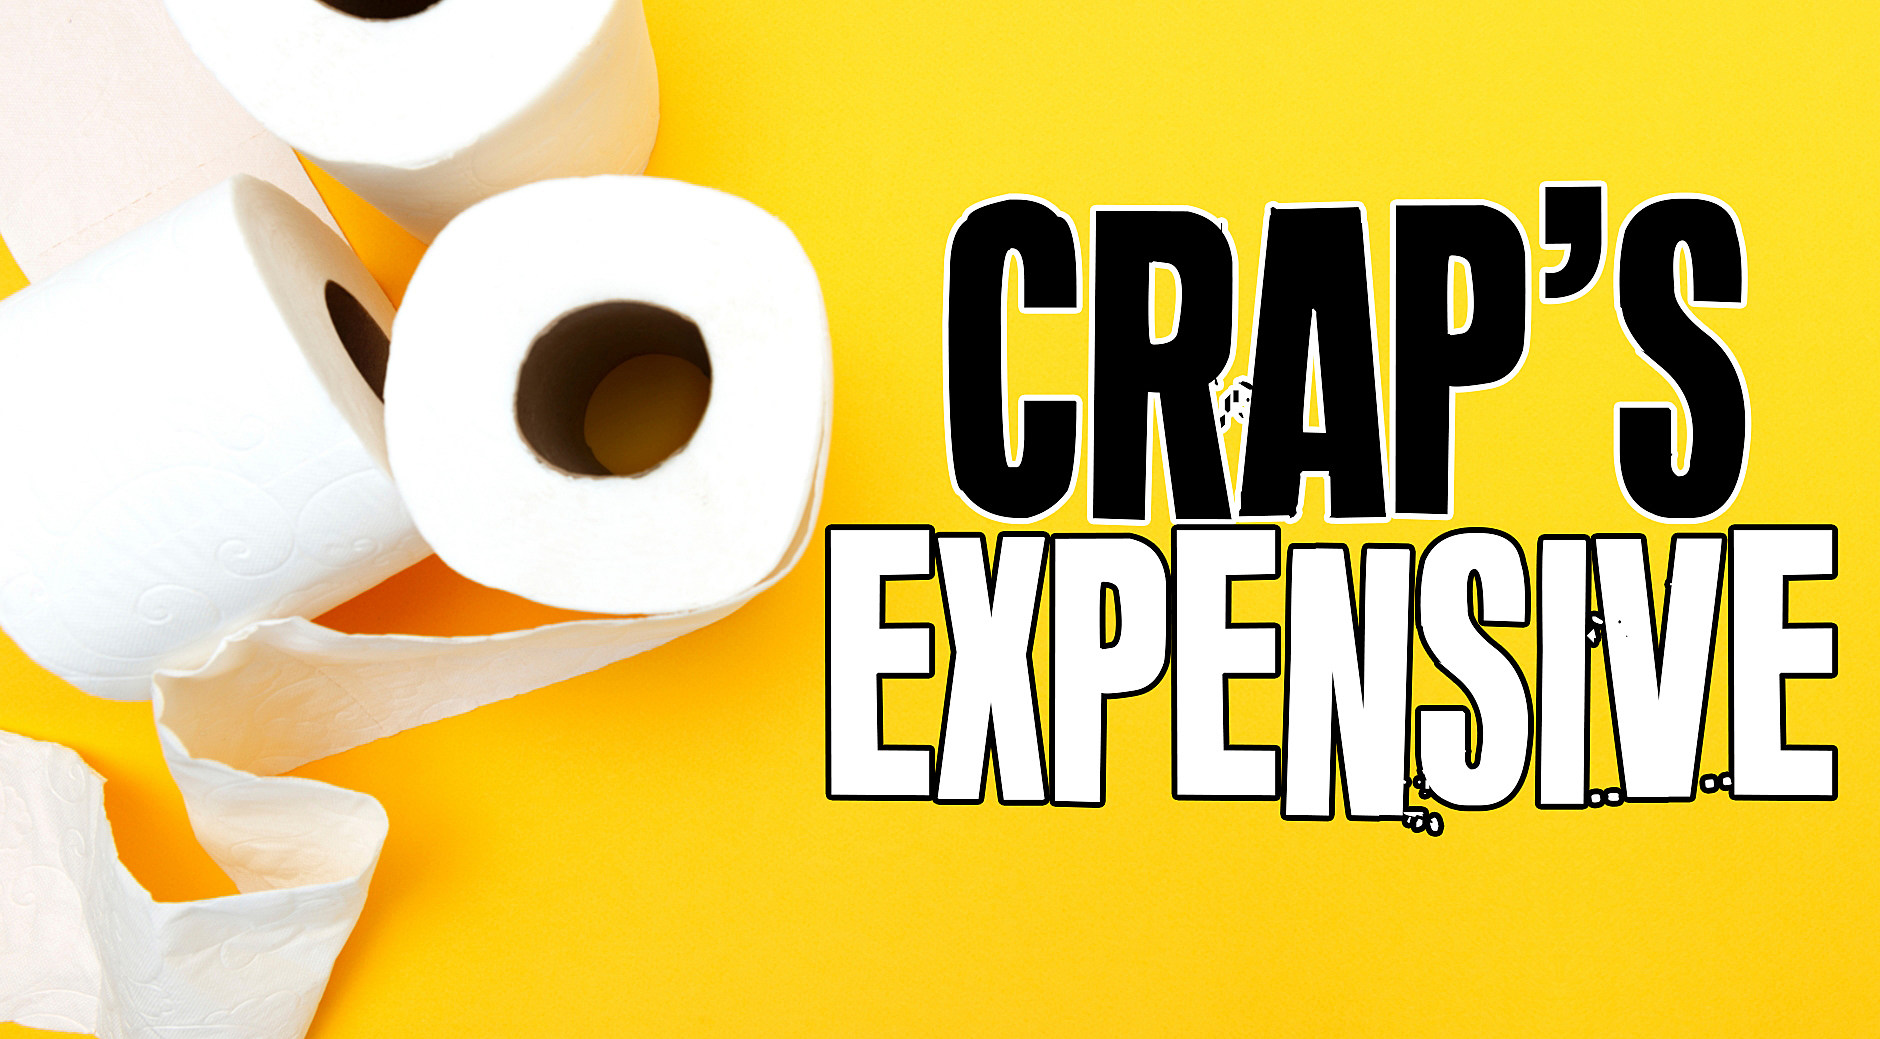 Is cheap toilet roll as good as expensive toilet roll?